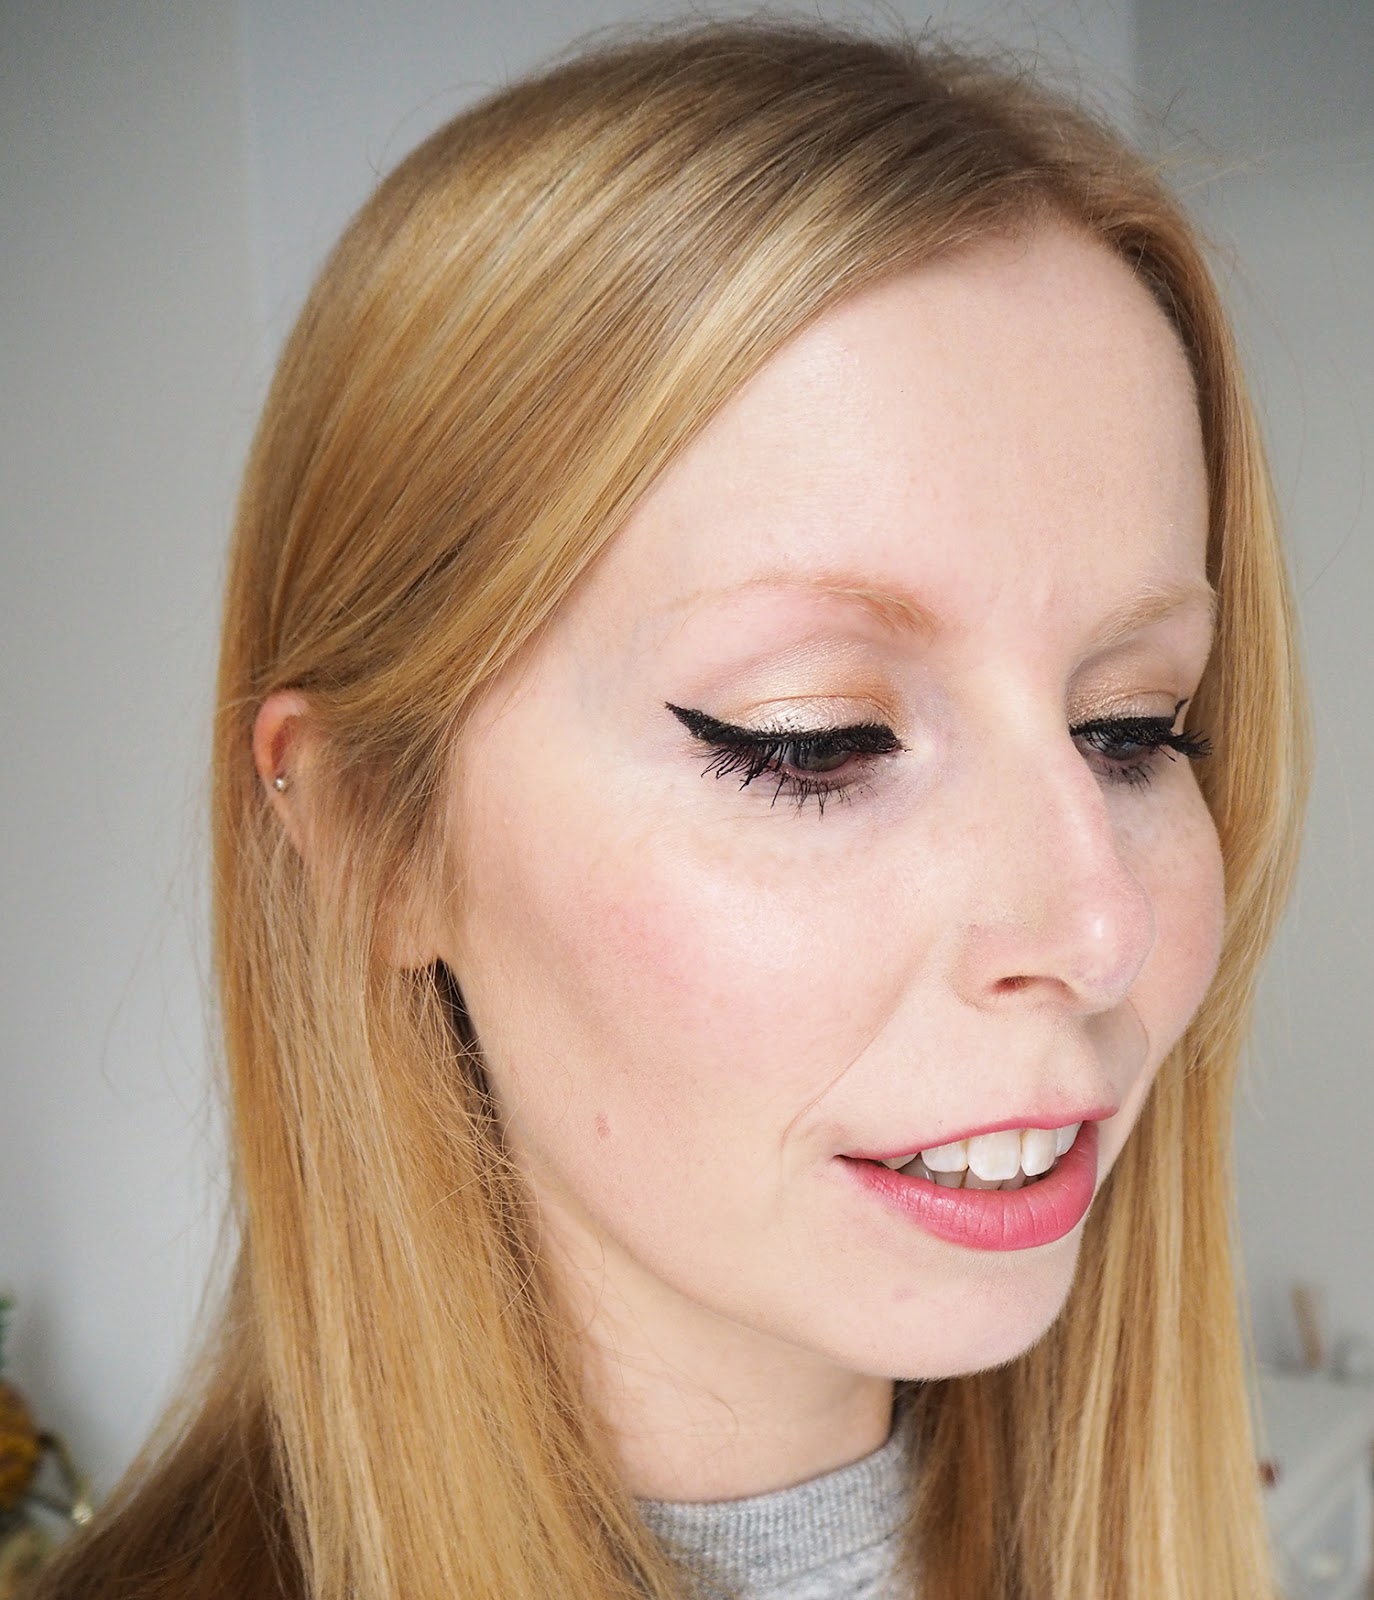 NARS Velvet Matte Skint Tint Terre Neuve review and swatches on pale skin